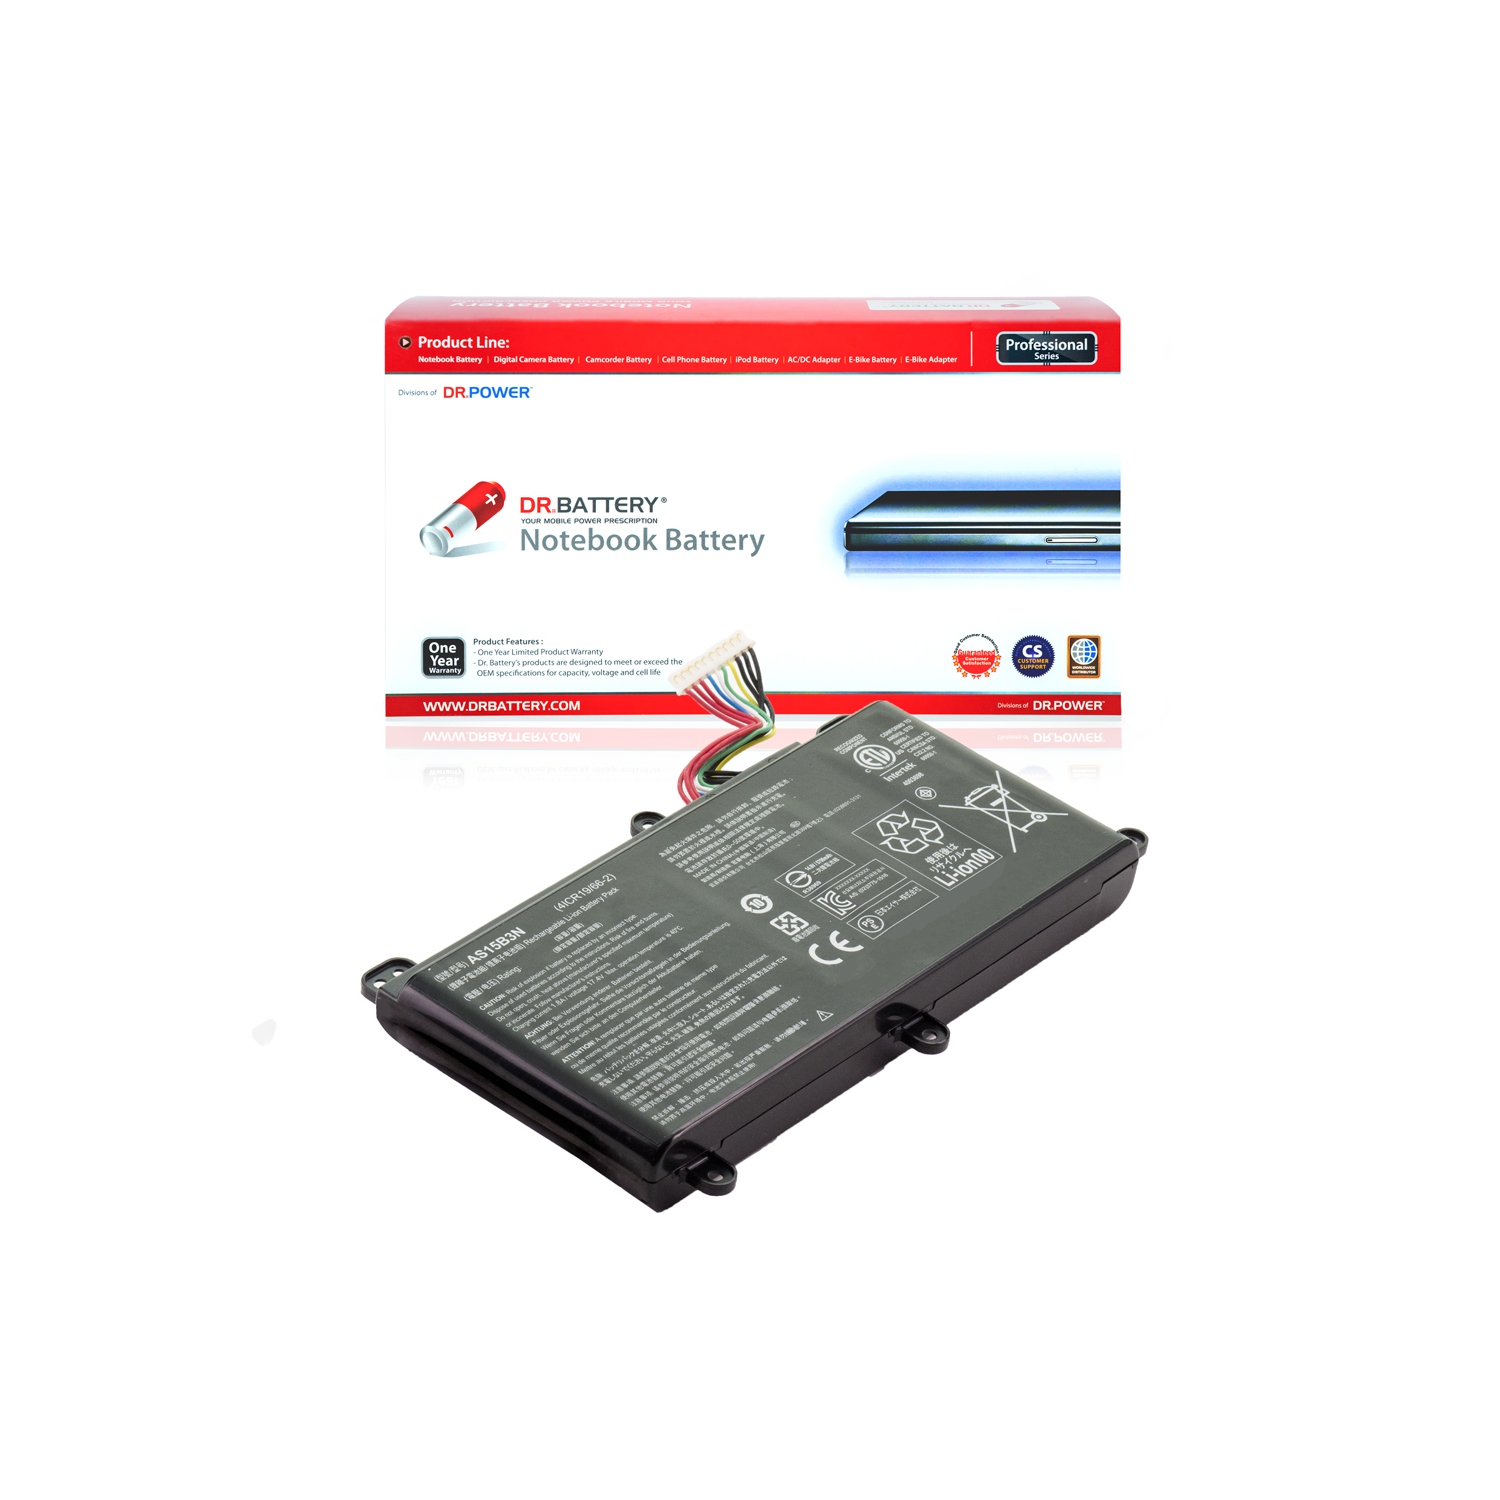 DR. BATTERY - Replacement for Acer Predator 15 G9-592-7253 / G9-592-7308 / G9-592-73W6 / G9-592-74NV / KT.00803.005 / AS15B3N